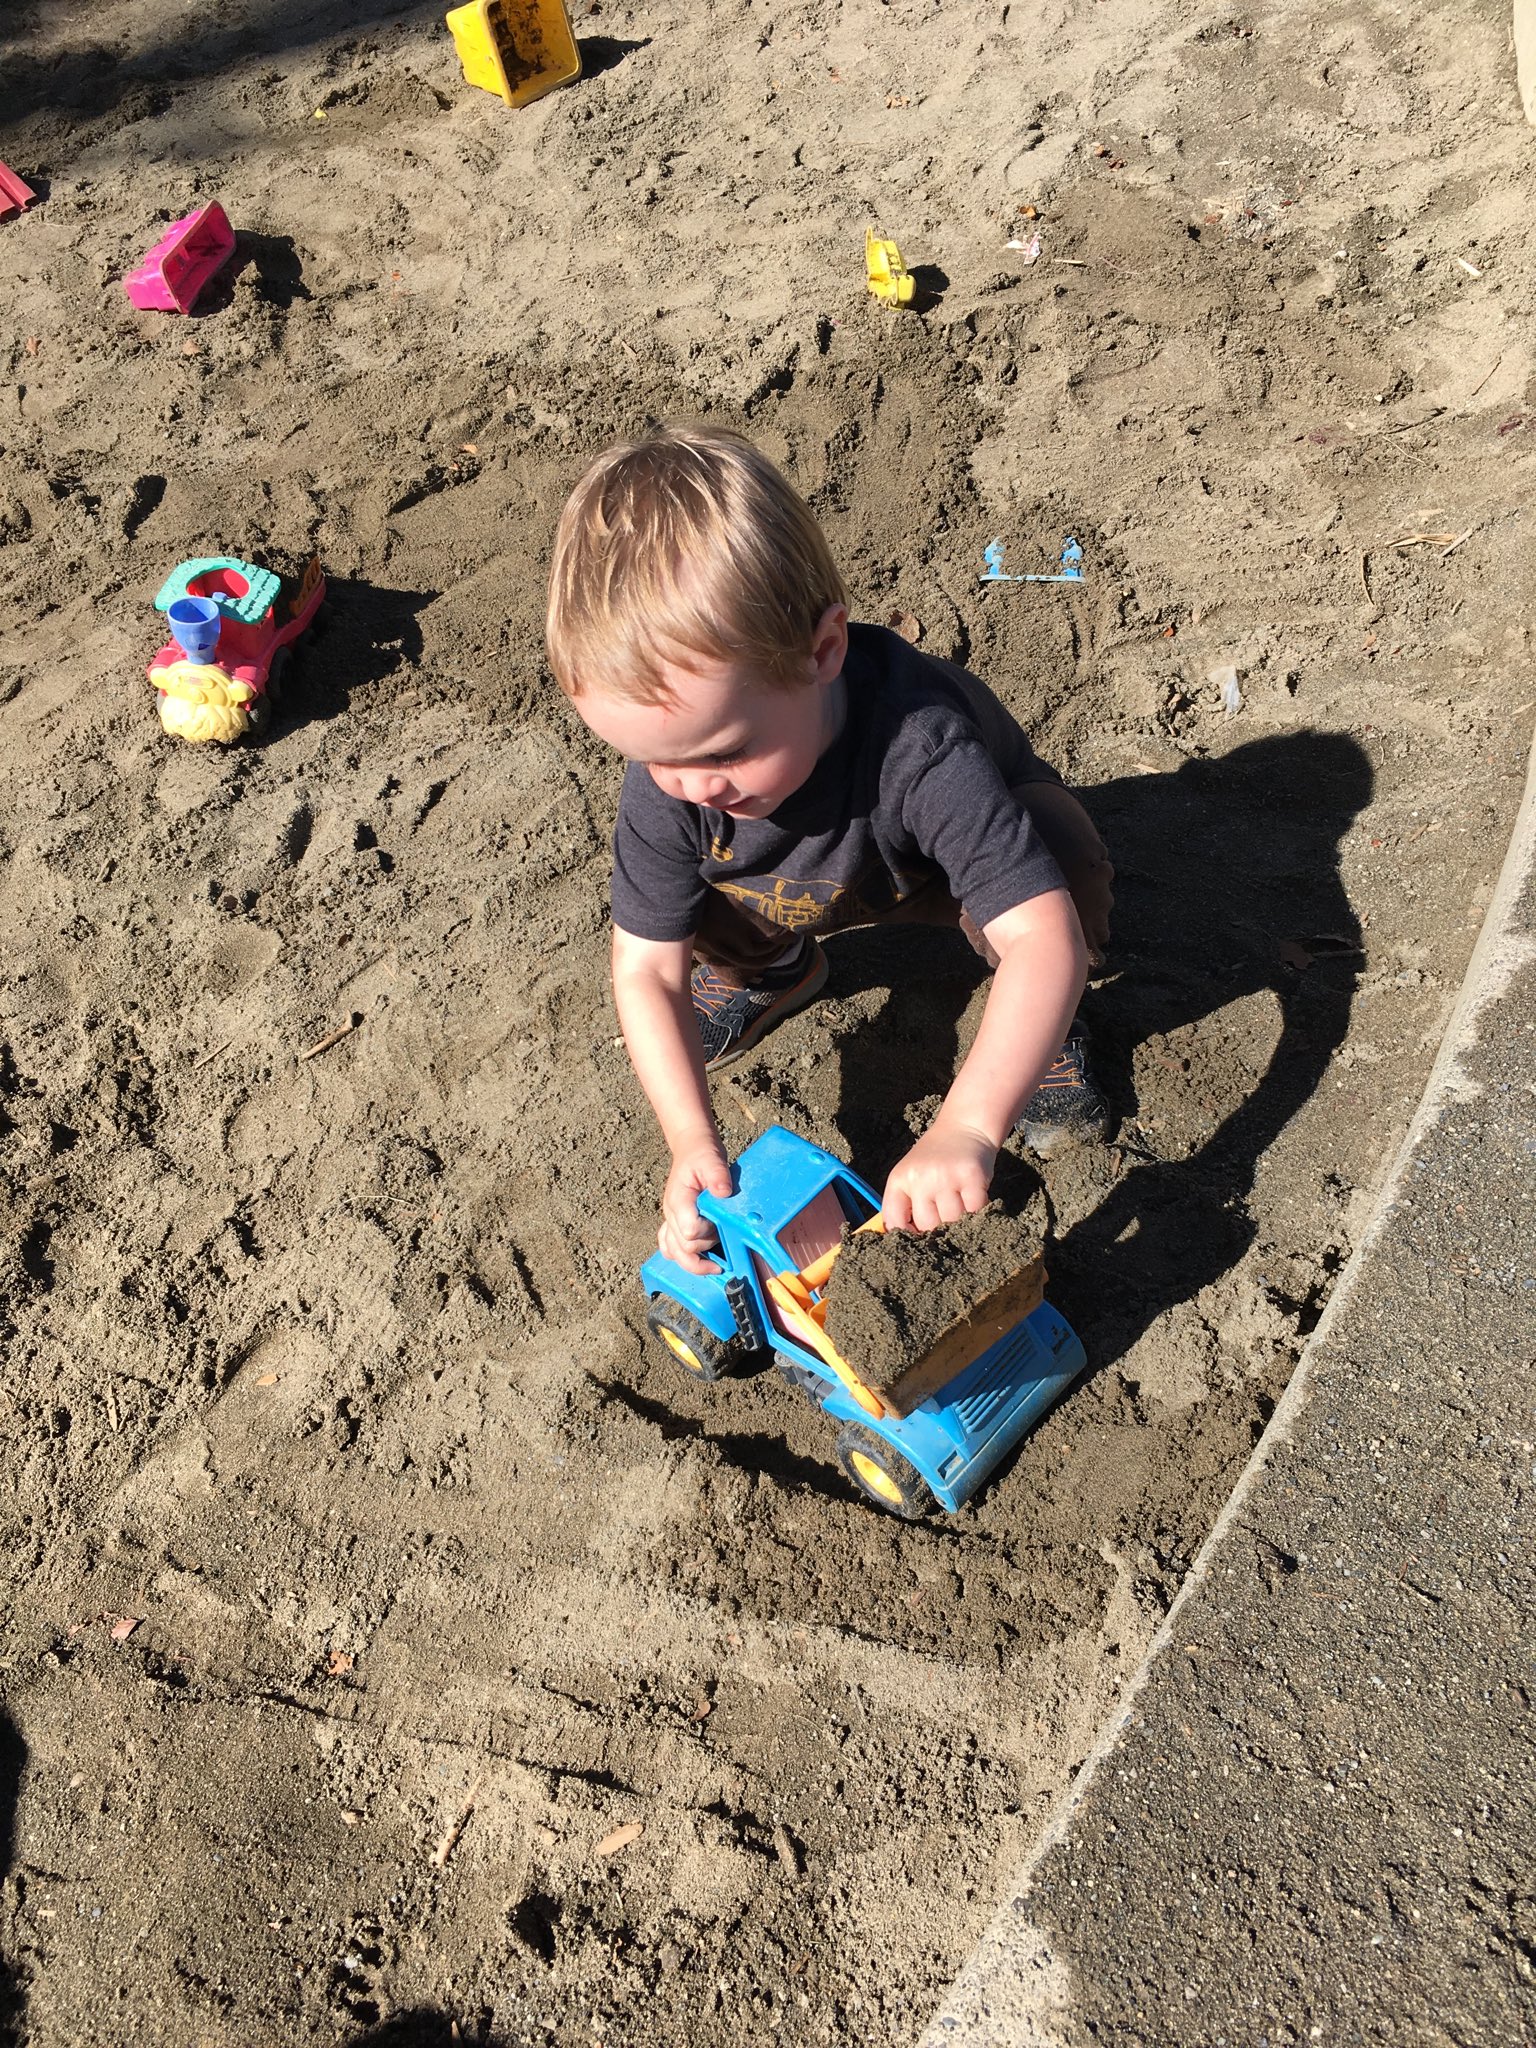 Julian crouches down in a sandbox and plays with a blue plastic construction truck.